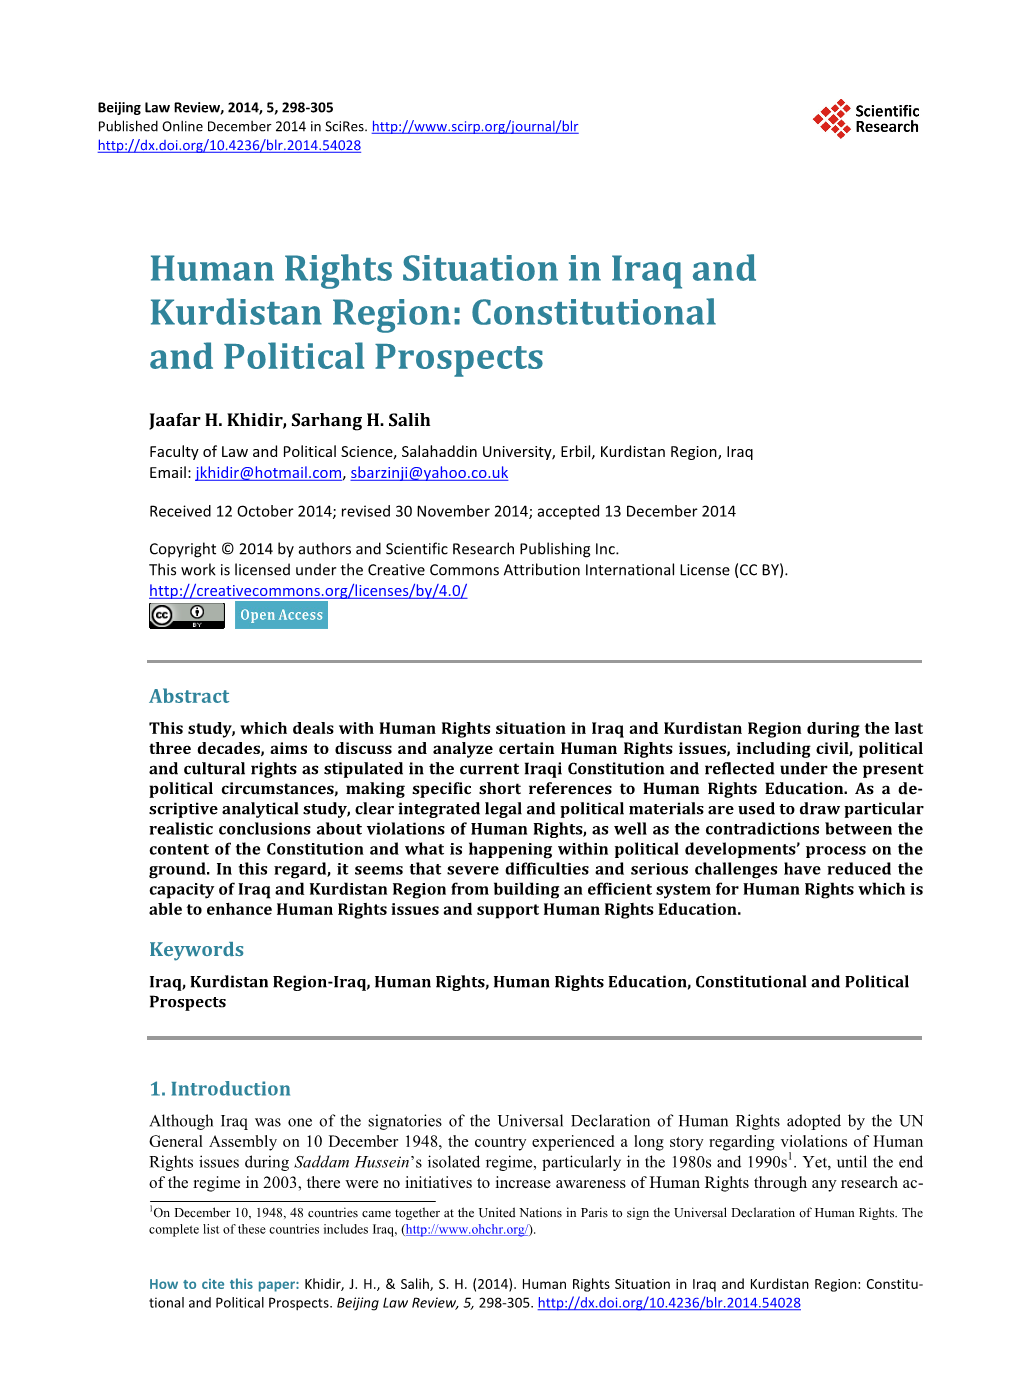 Human Rights Situation in Iraq and Kurdistan Region: Constitutional and Political Prospects